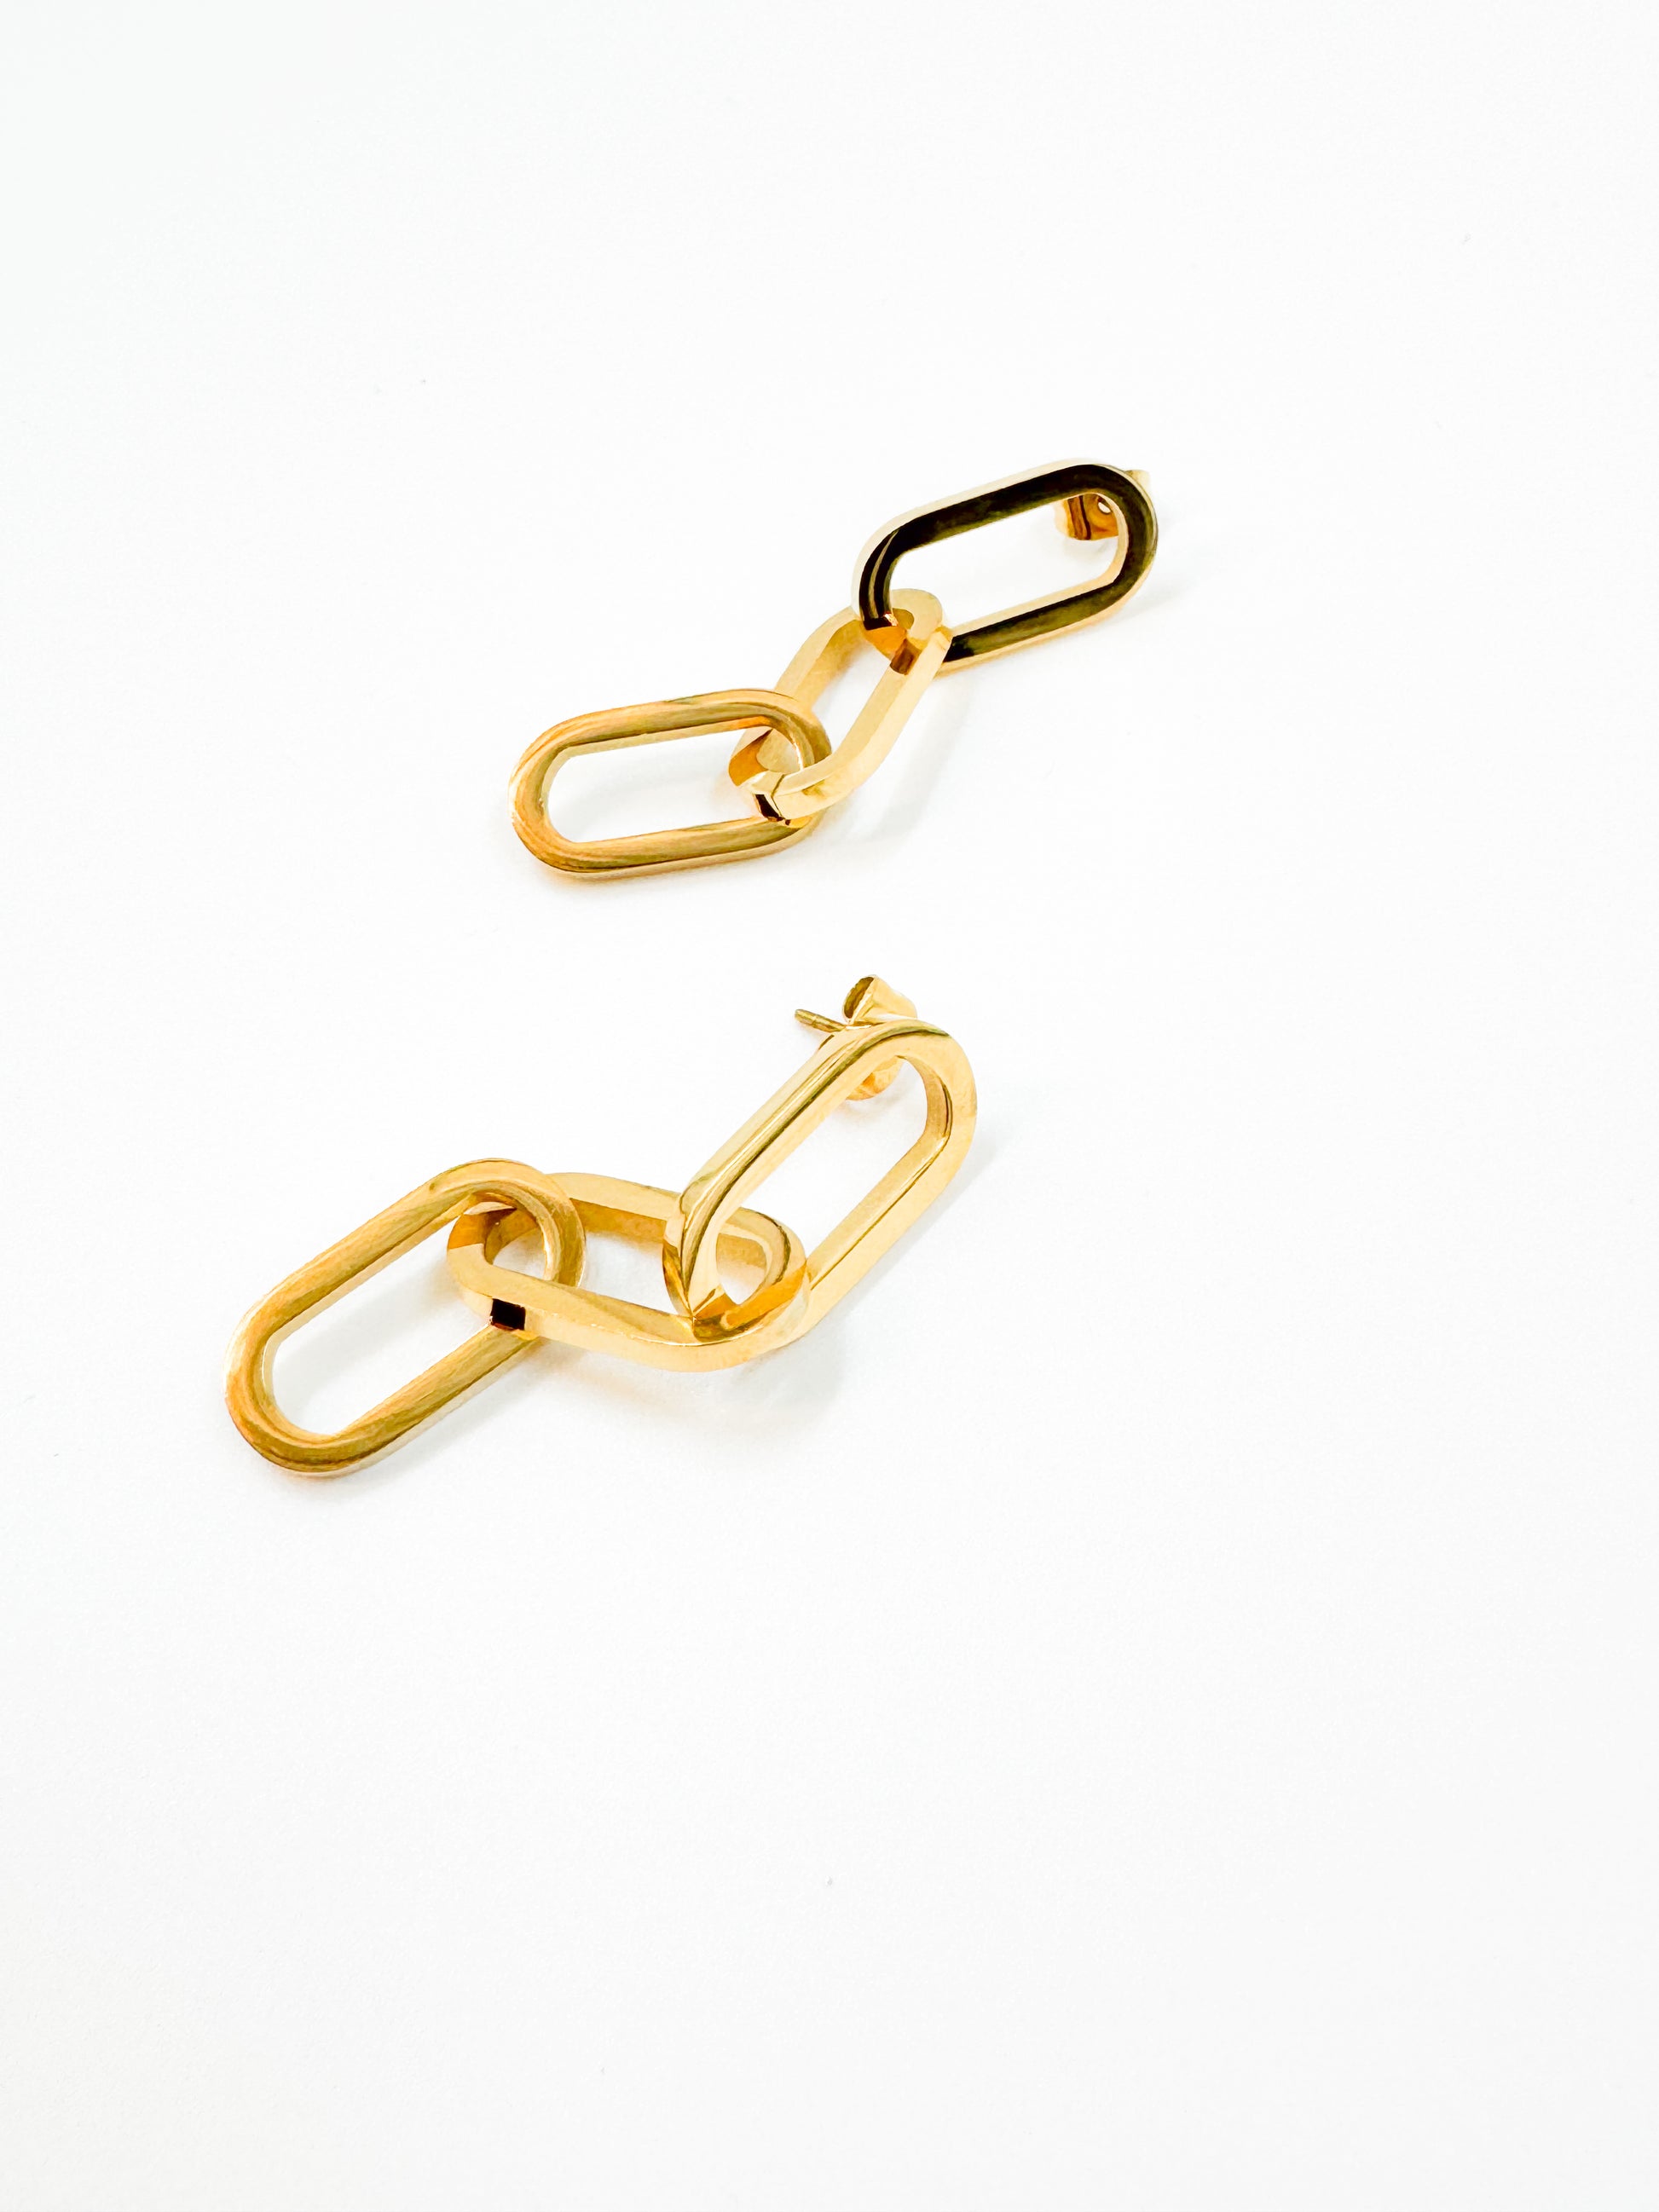 Large paperclip link earrings in gold